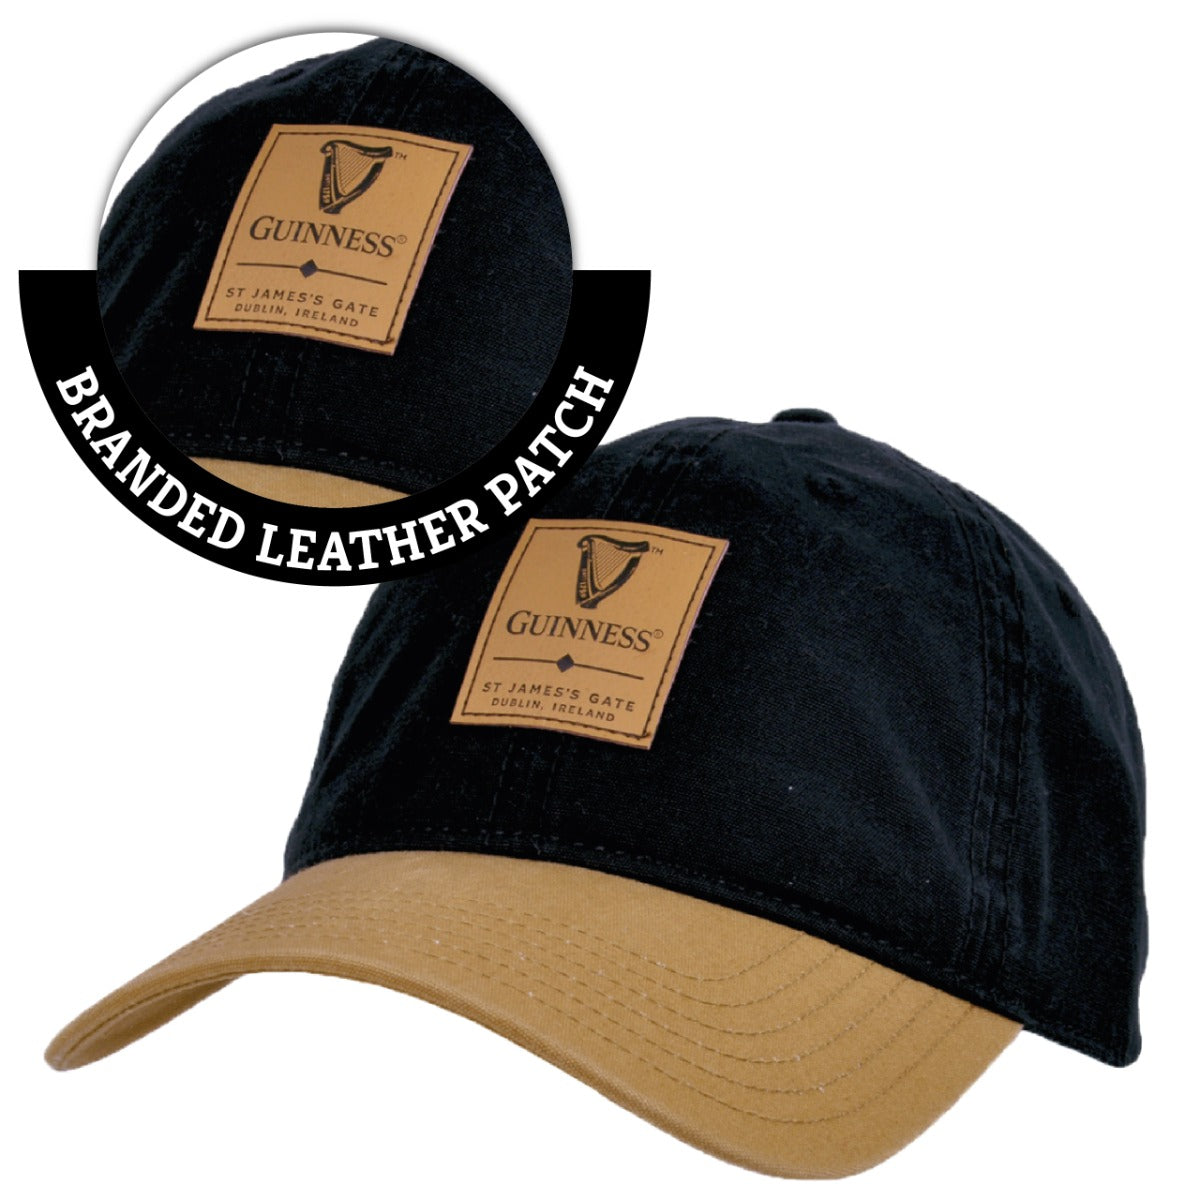 A Guinness Black & Caramel Cap with Leather Patch branded baseball cap.